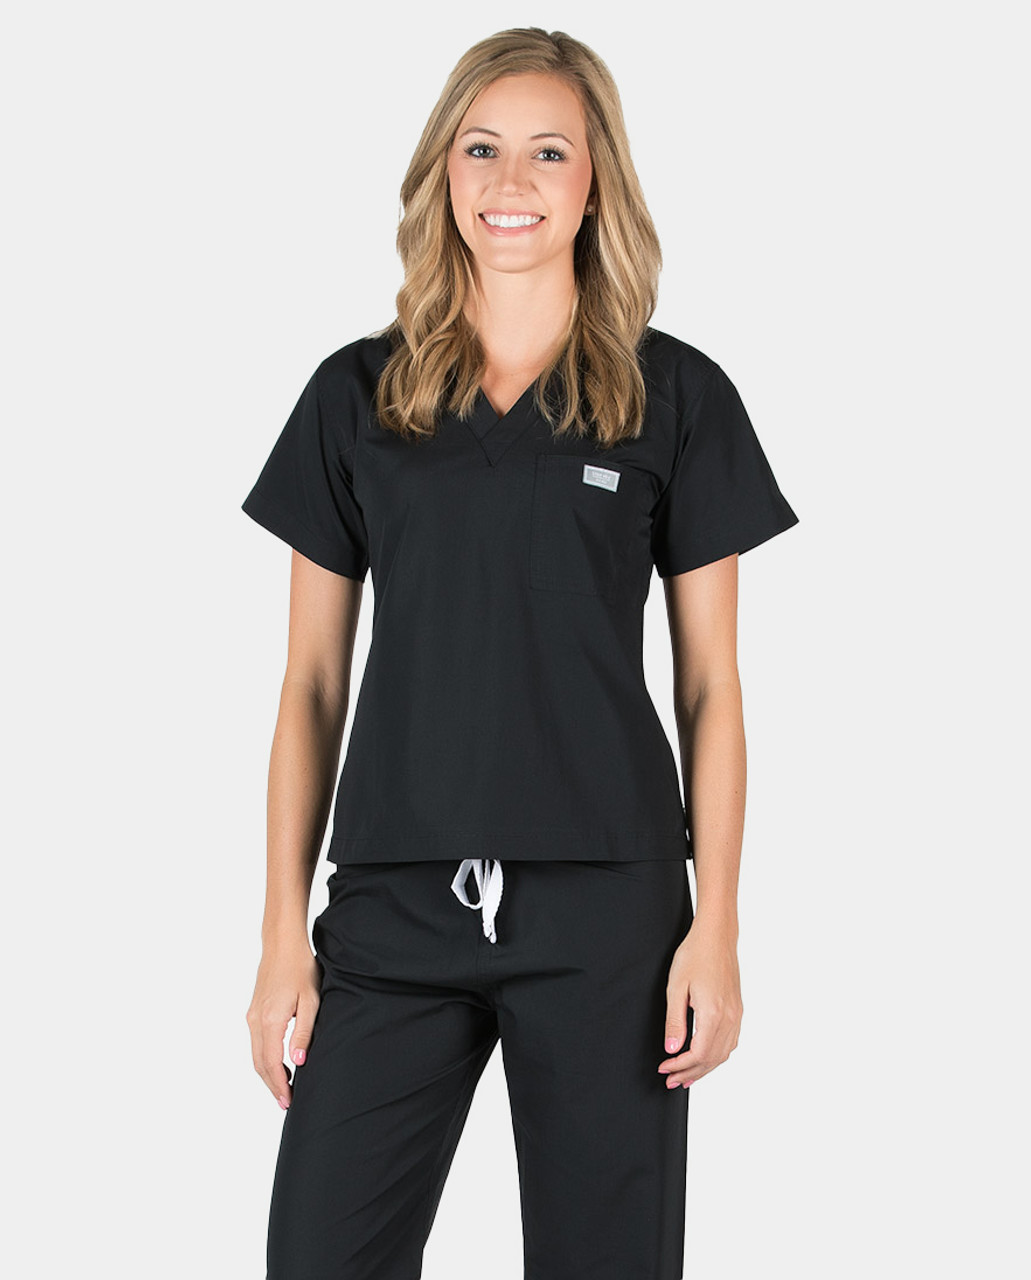 Blue Sky Scrubs  Sleek and Tailored - Petite Grey Label Shelby